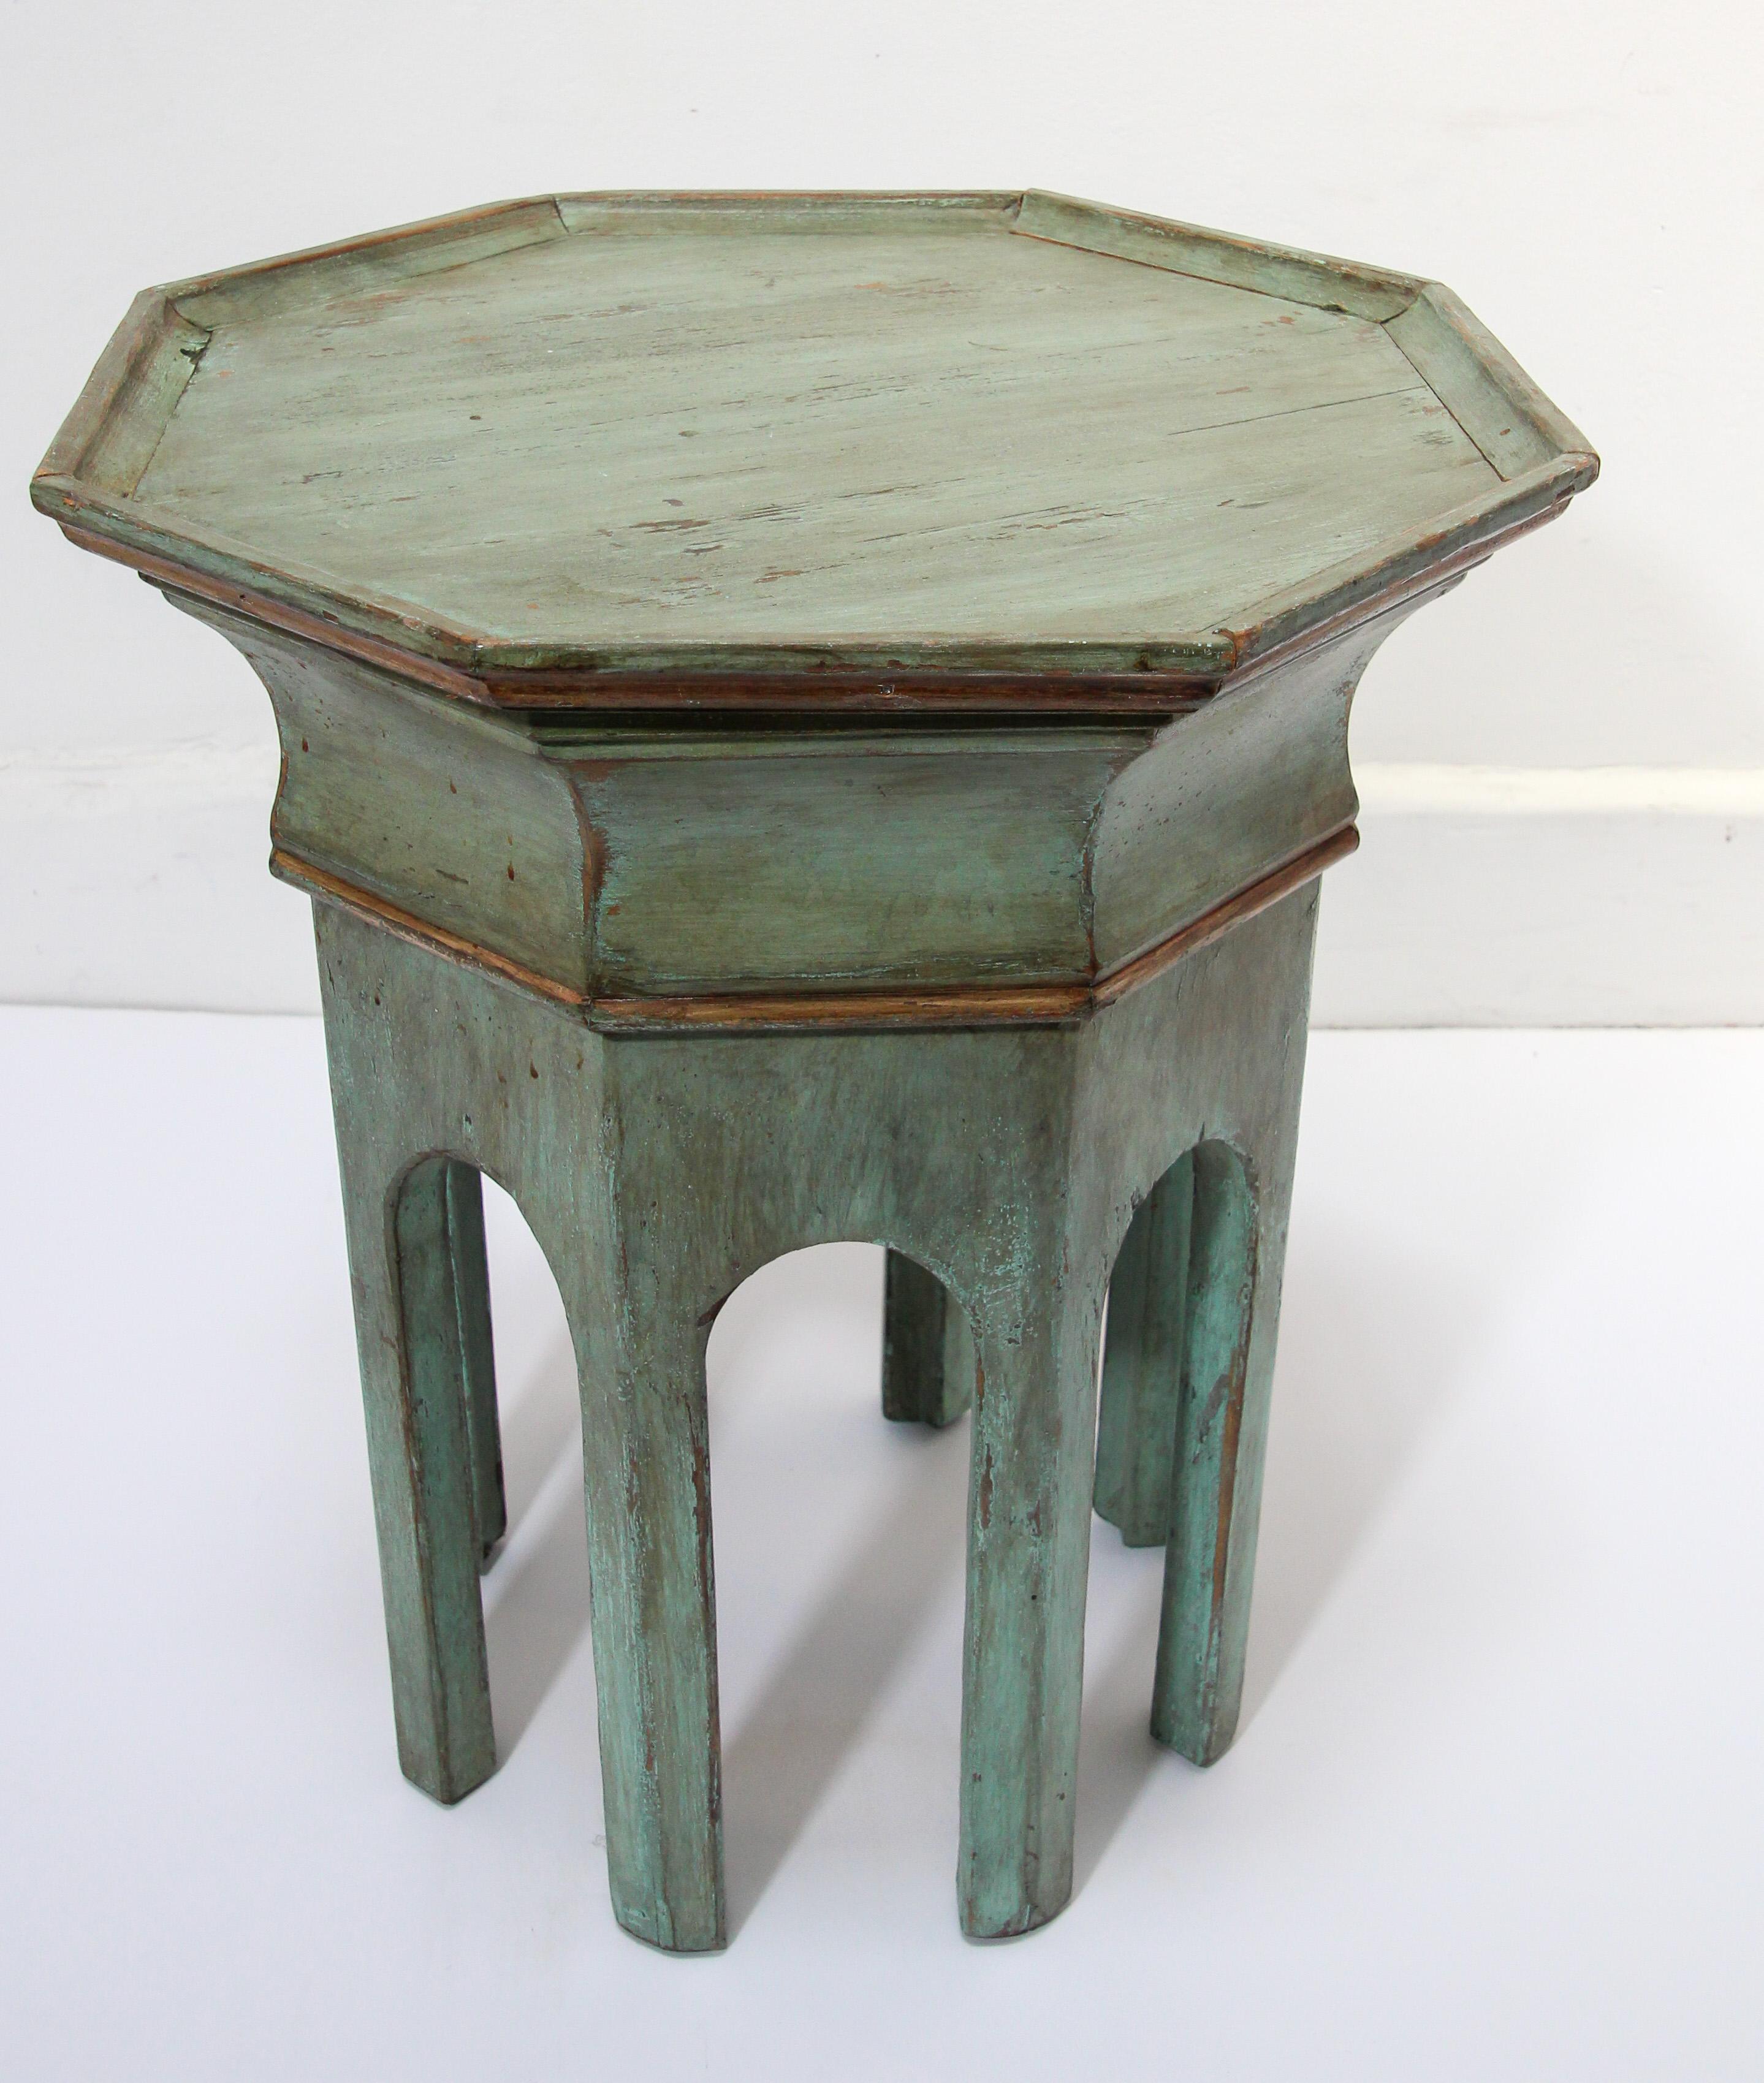 Levantine hexagonal occasional accent side table with Moorish arches.
Moroccan style wood table distressed look with aged look patina.
Very simple modern Moroccan contemporary design.
Will work with any modern or traditional decor.


  